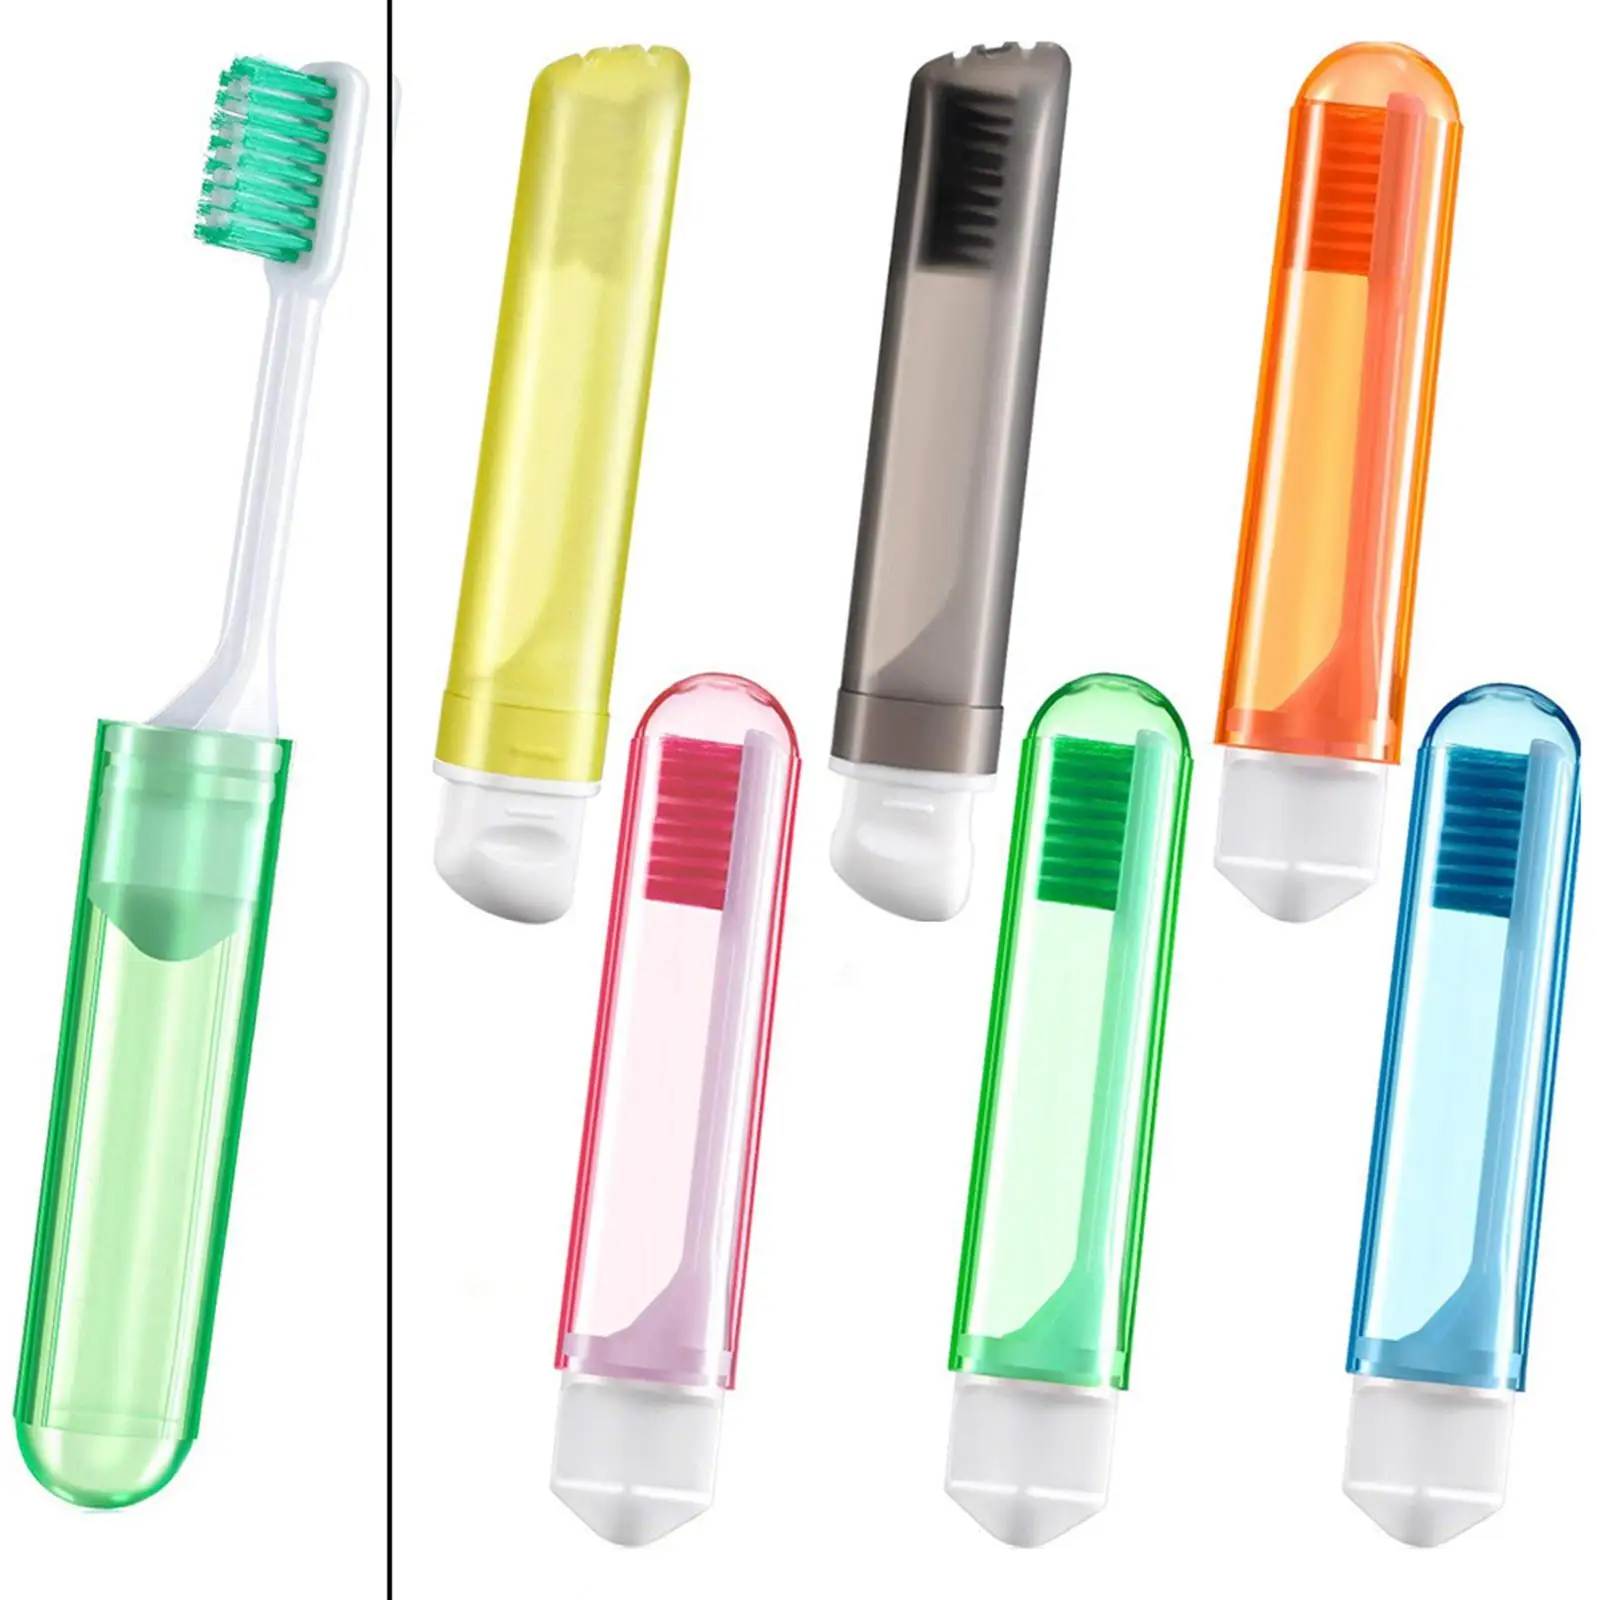 6 Pcs Portable Folding Toothbrush Practical Pocket Size Travelling Toothbrush for Camping Holidays Business Girl Boy Kids Adults